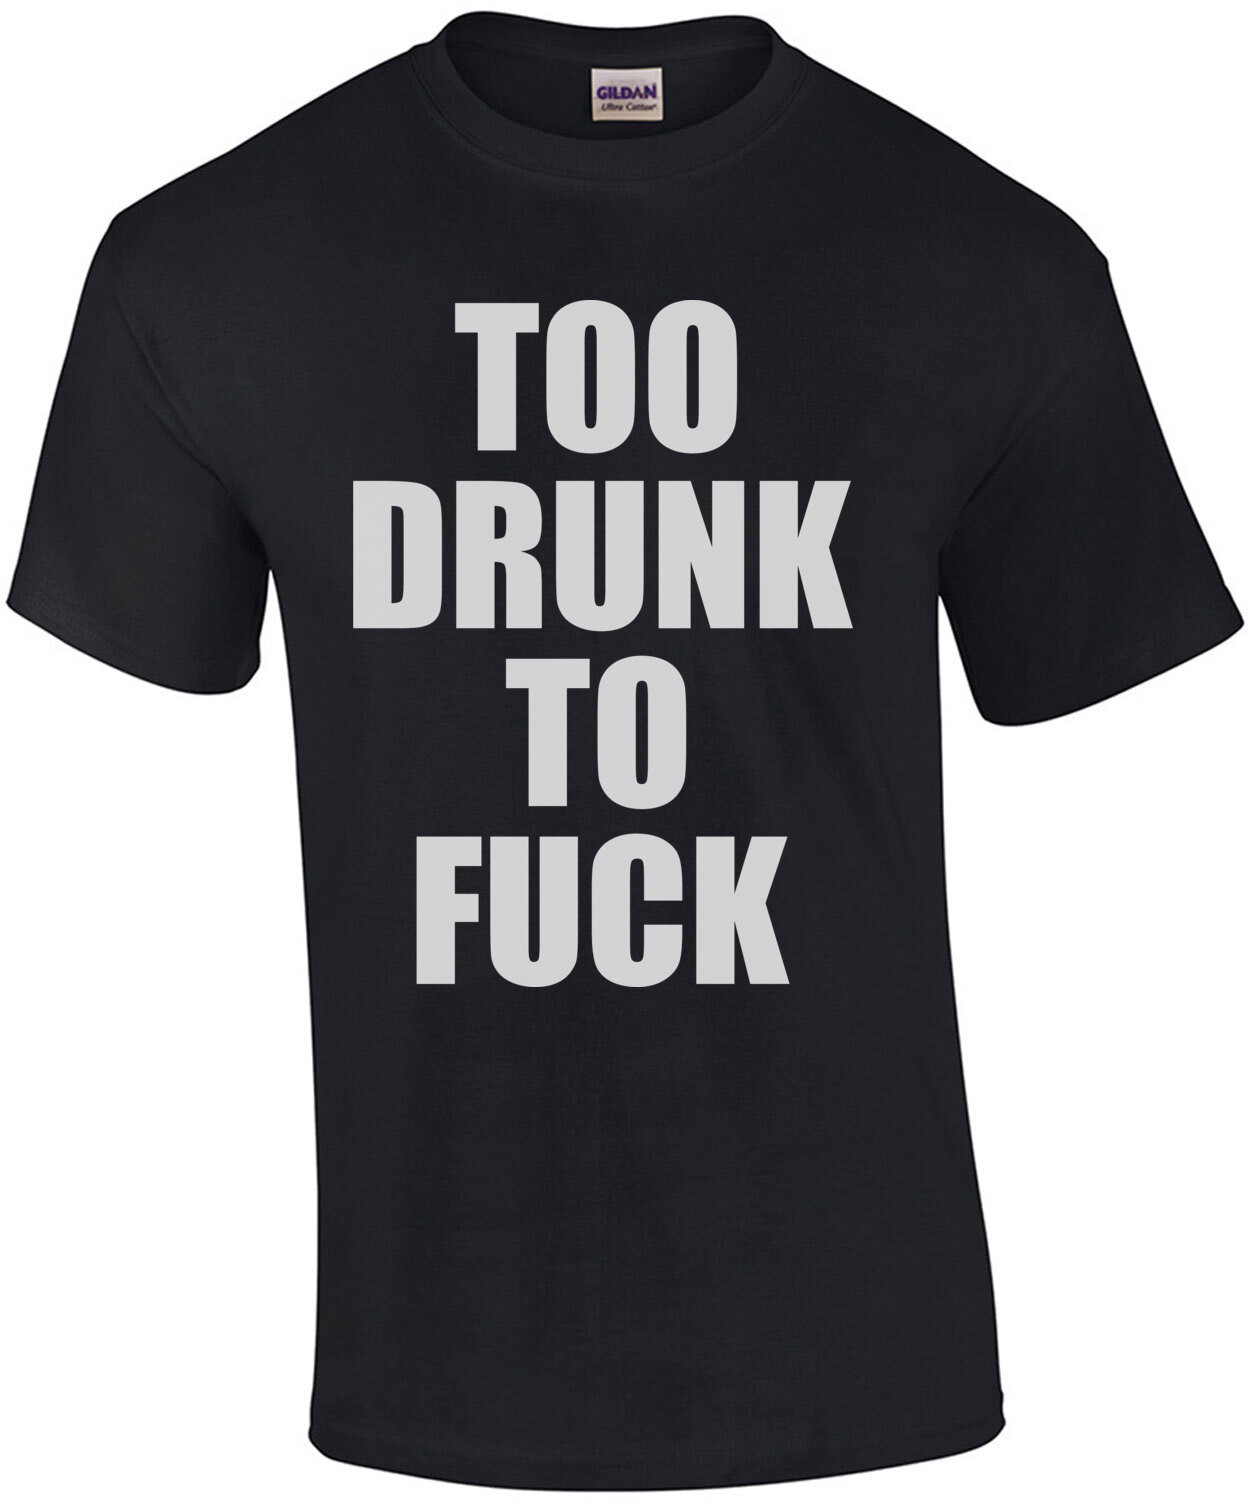 Too Drunk To Fuck - Funny sexual offensive drinking t-shirt